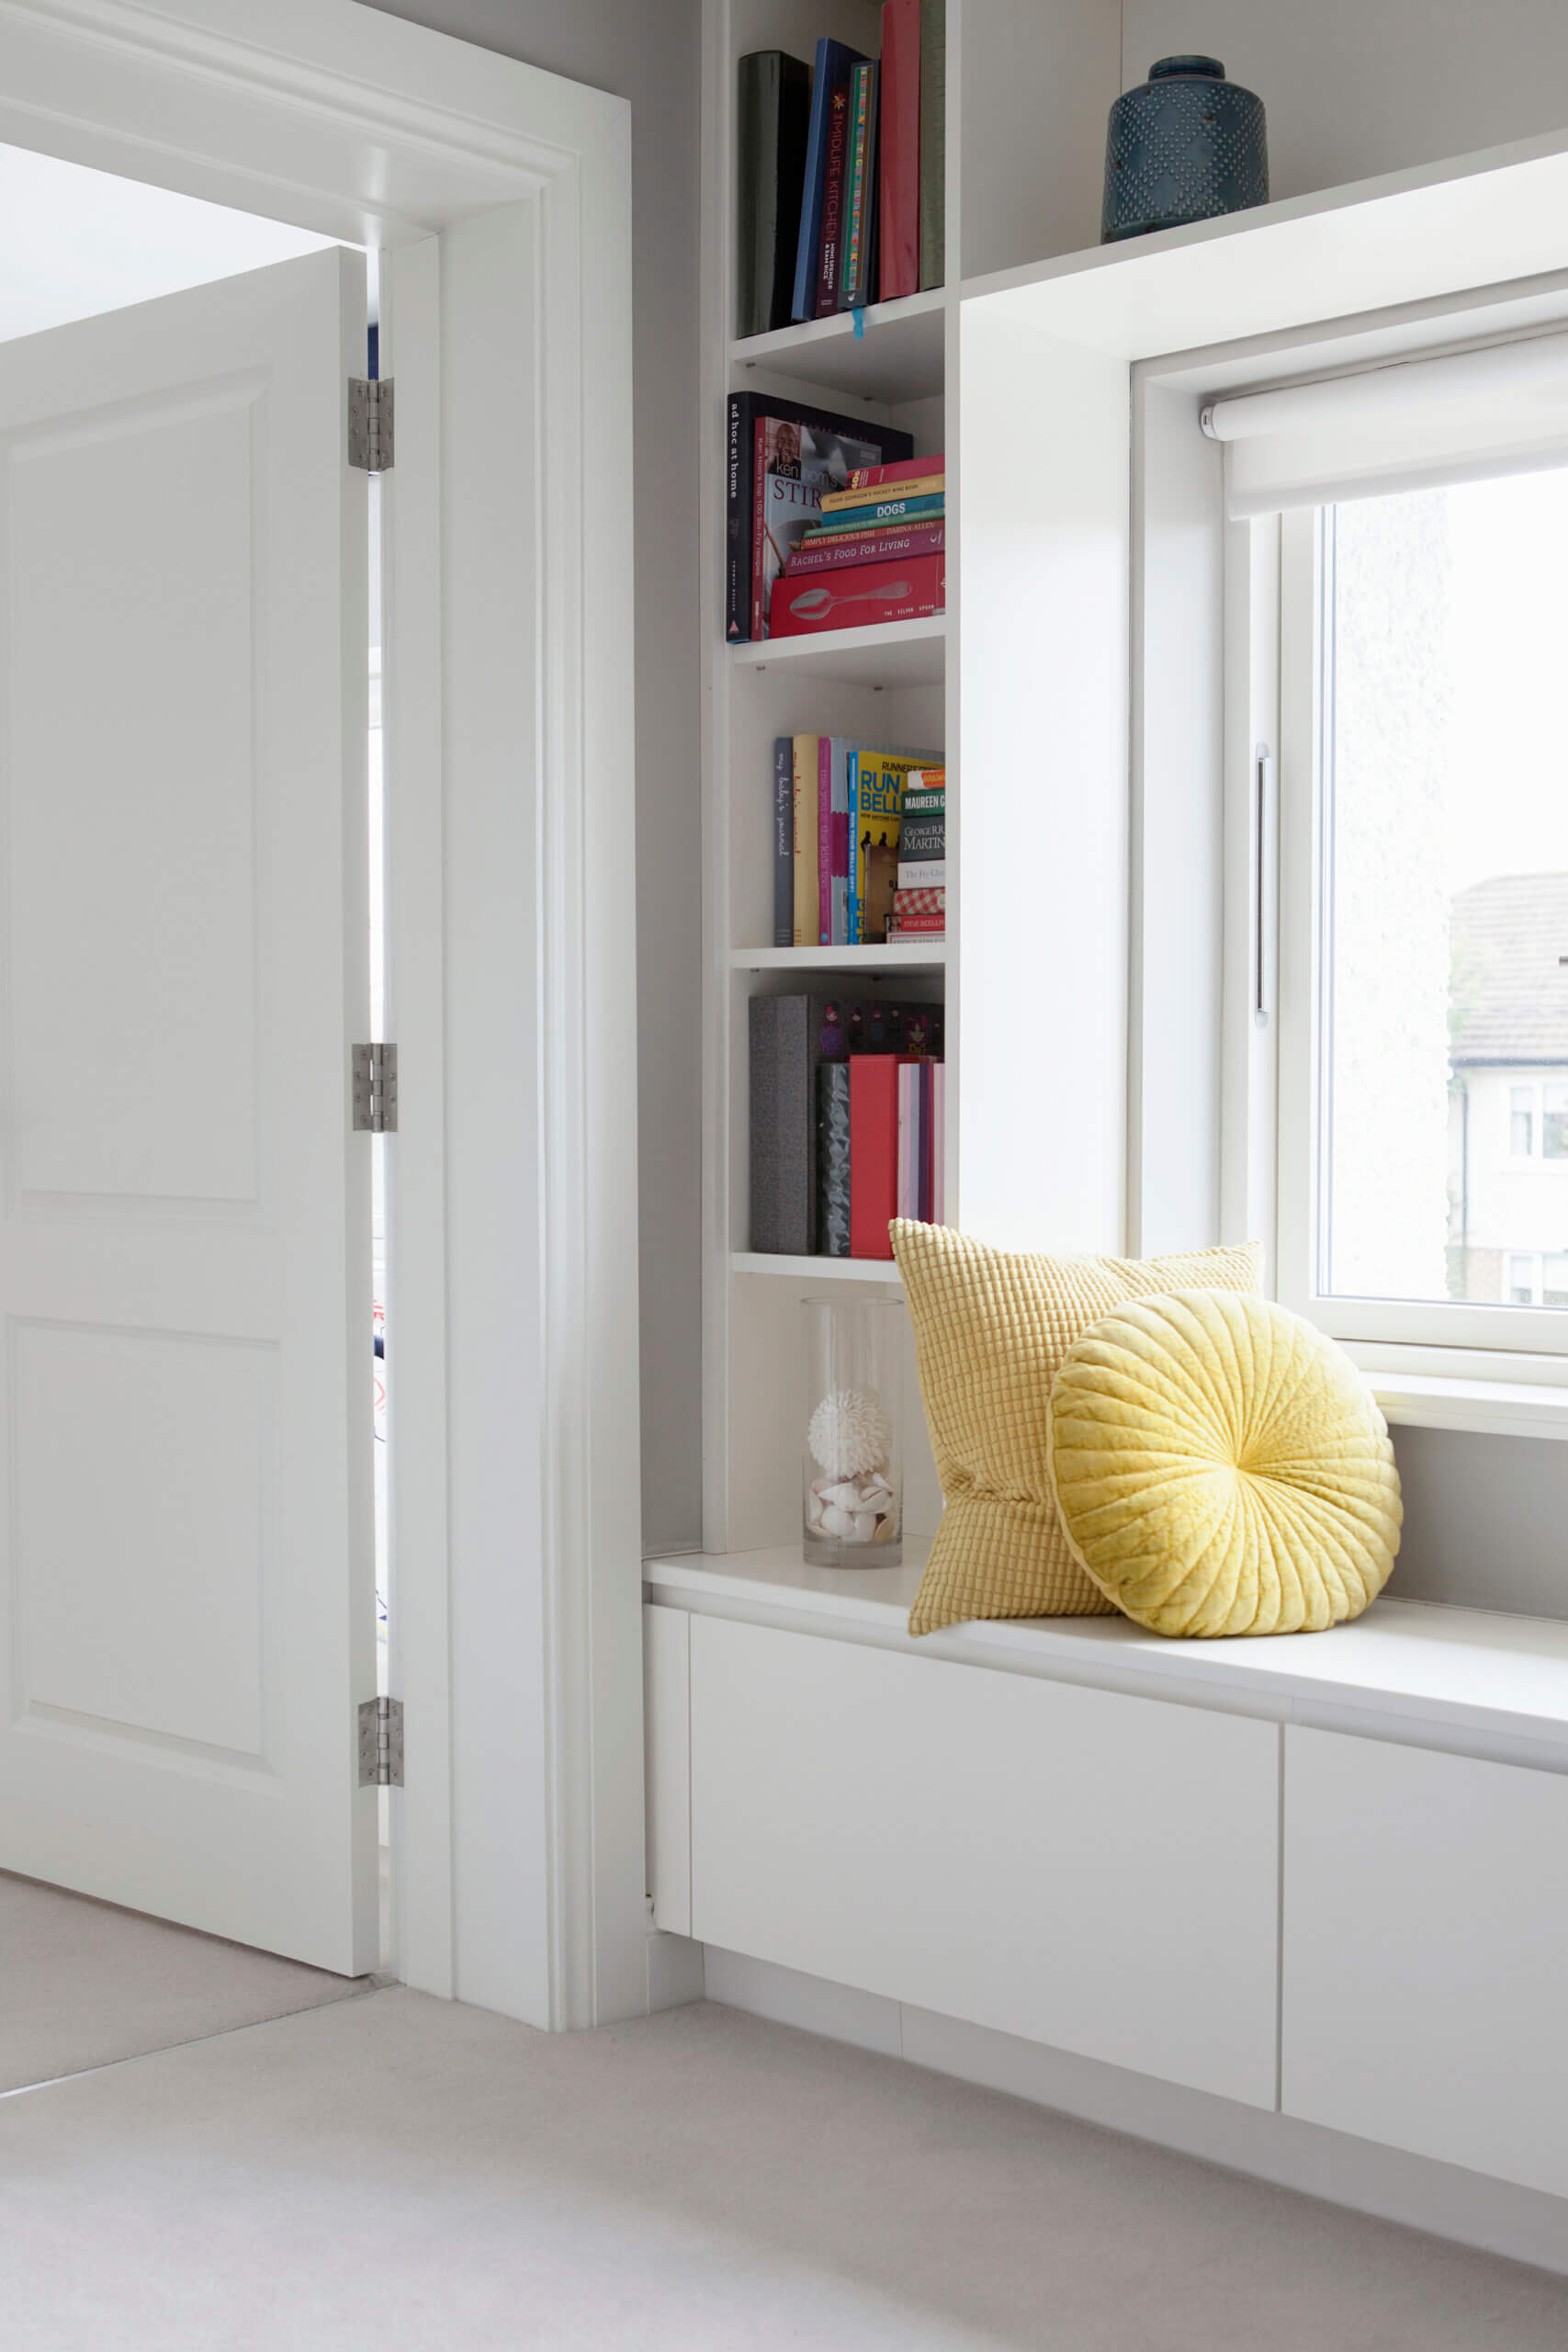 Unlocking Hidden Space: How to Find Extra Room in Your Home Without Extending